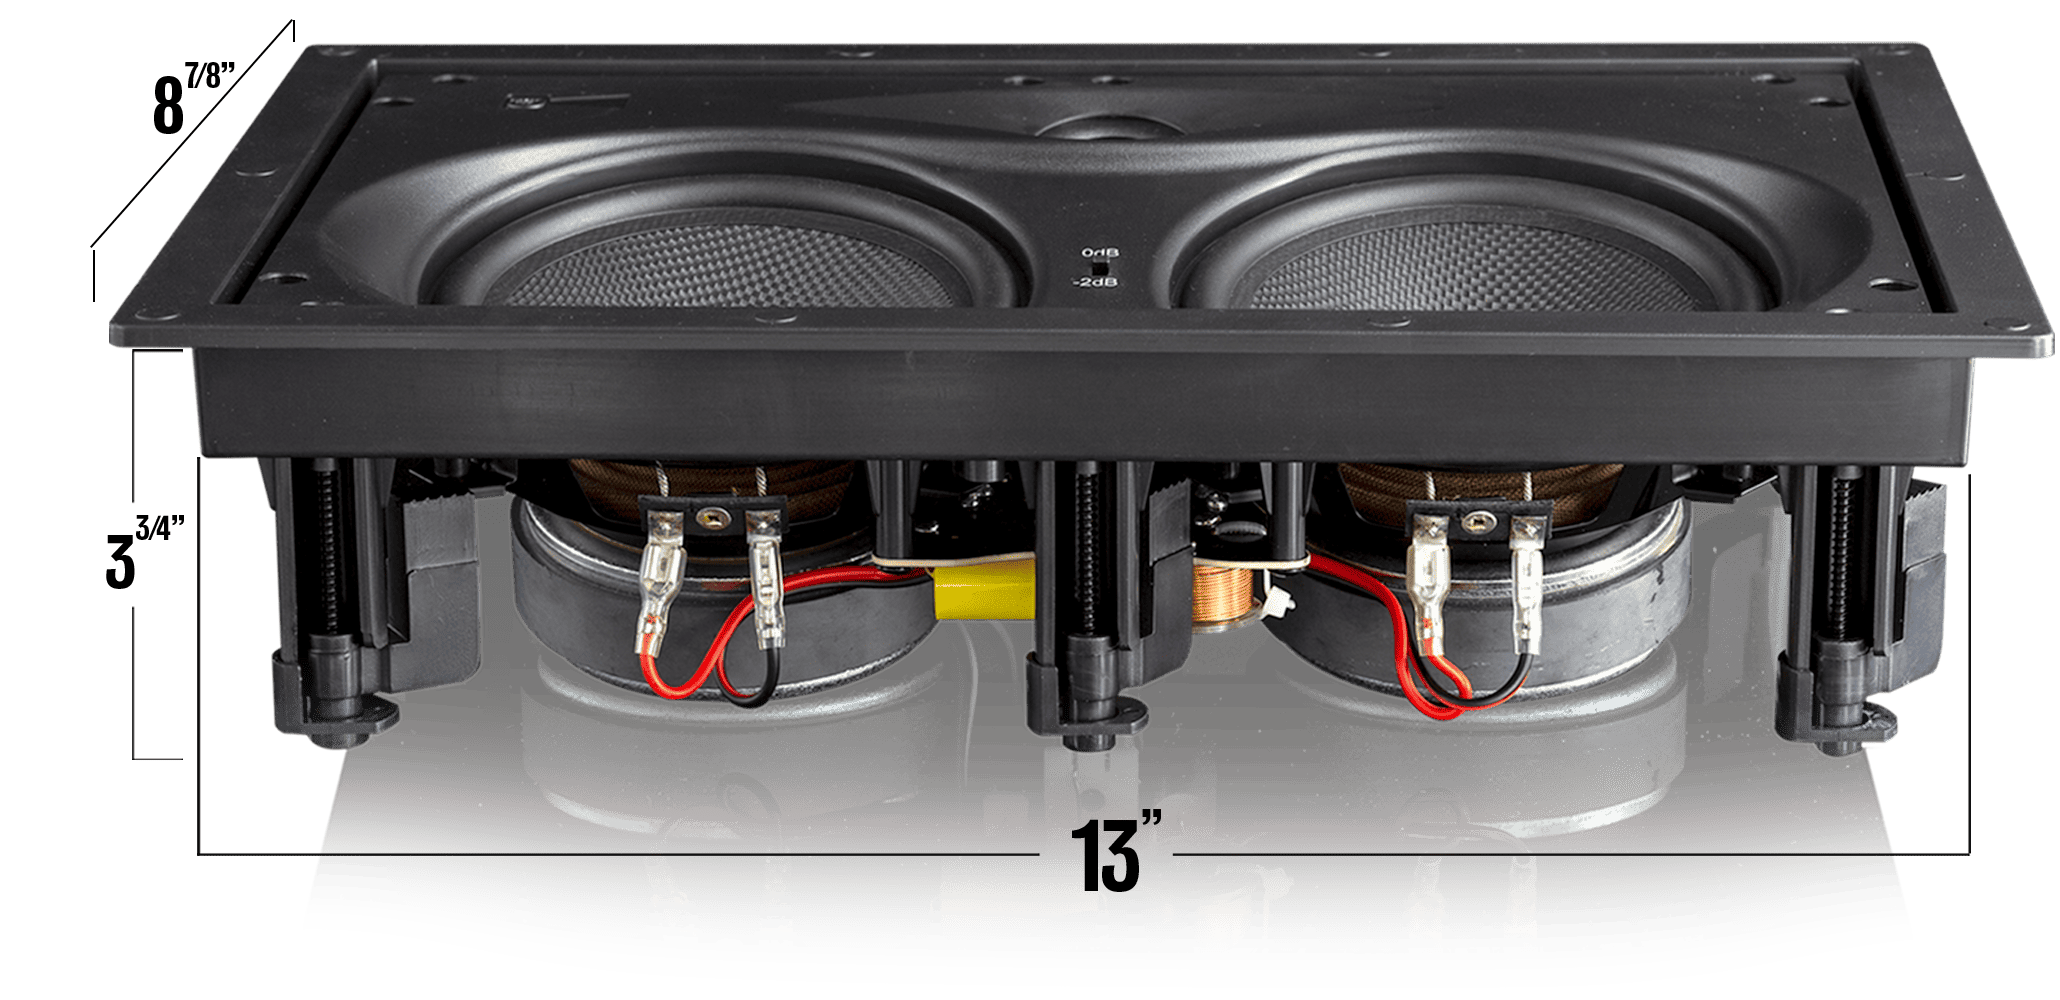 RSL Speakers W25E In-Wall speaker with guides stating its' mounting dimensions